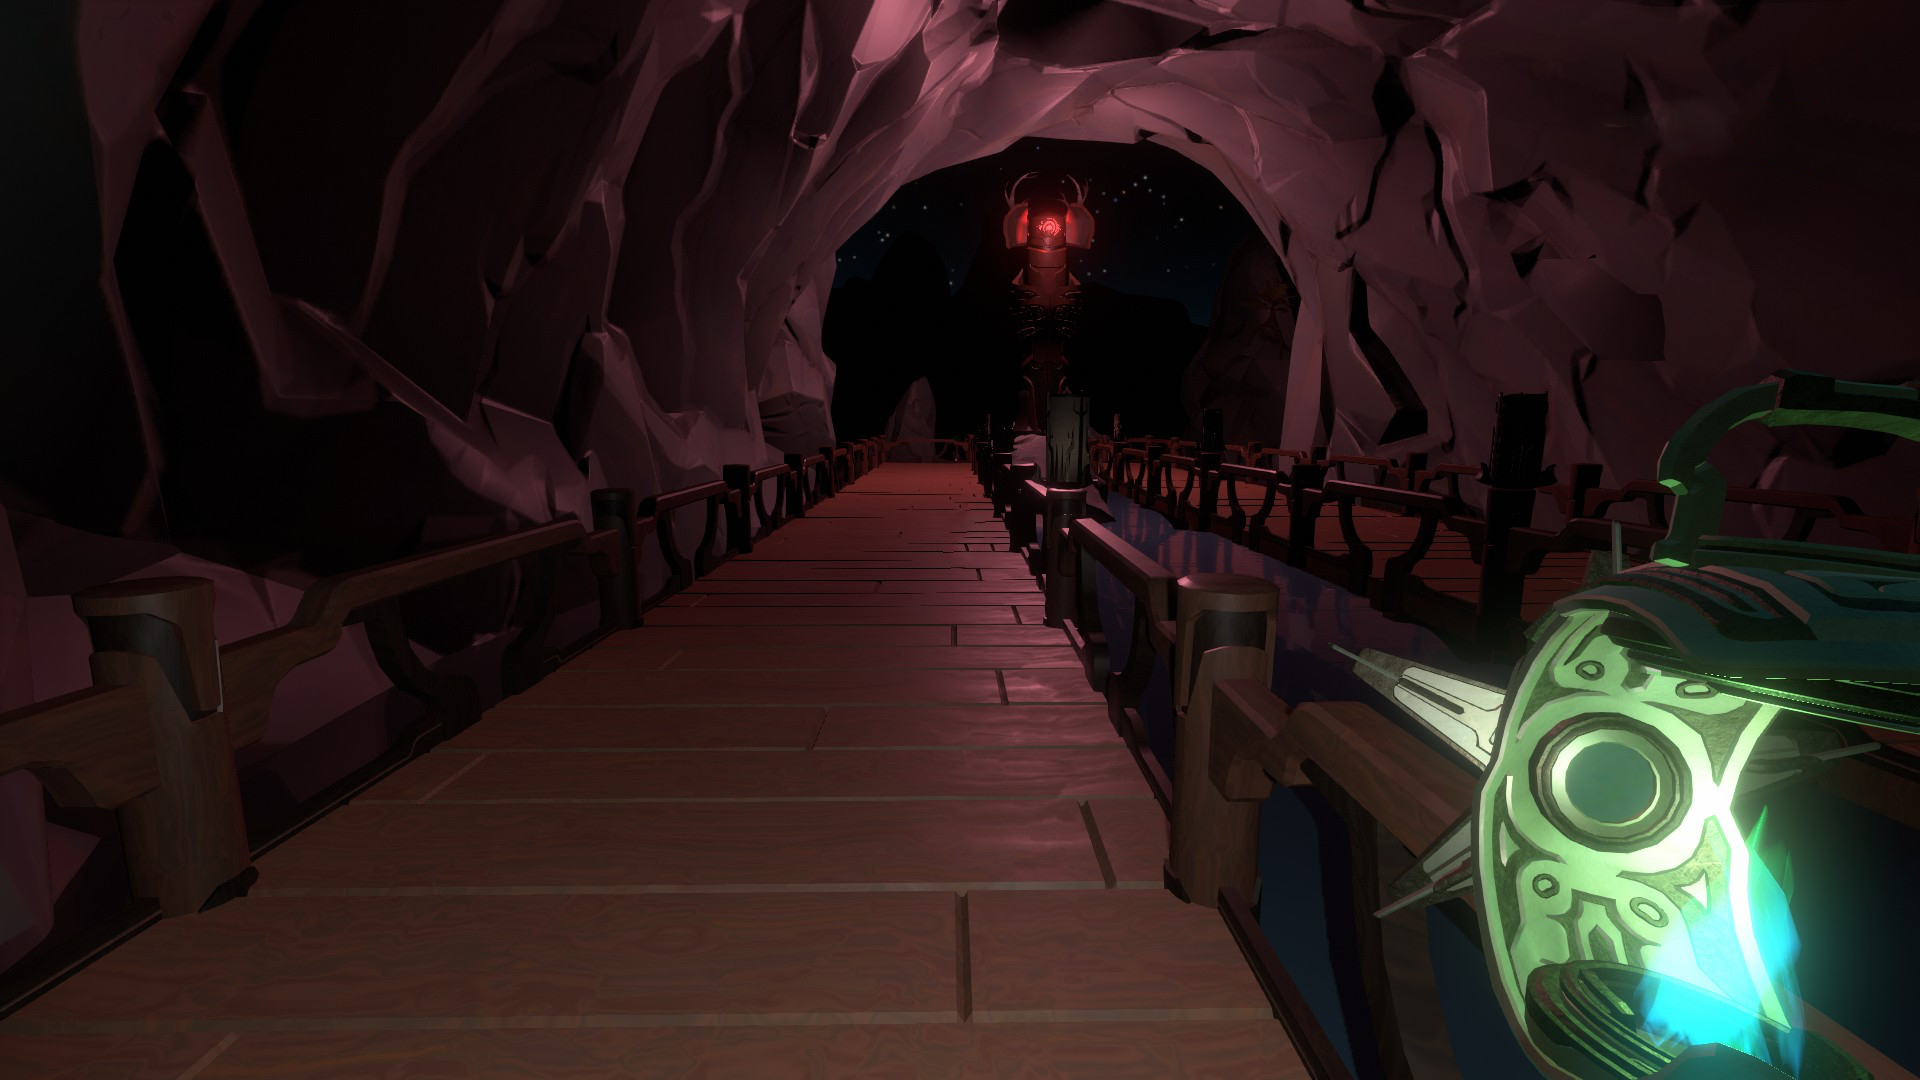 A Watcher in Outer Wilds: Echoes of the Eye